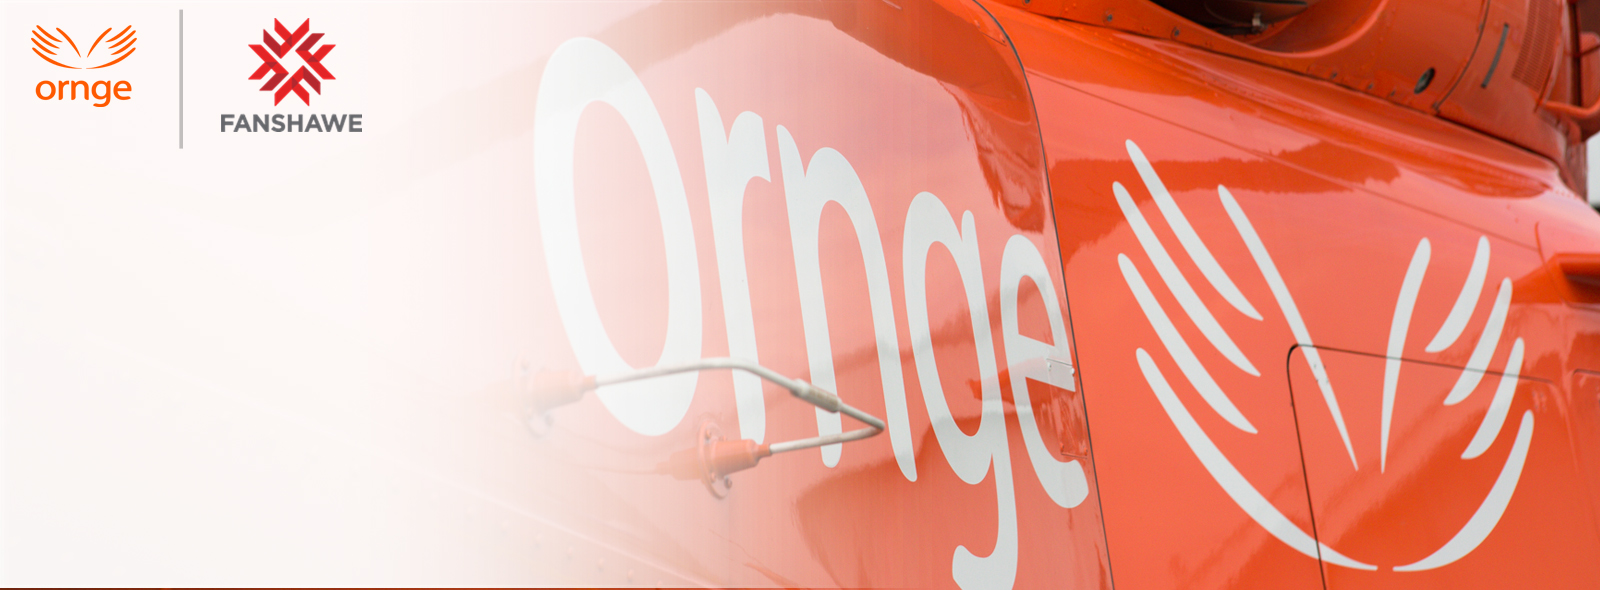 Ornge and Fanshawe College Press Release